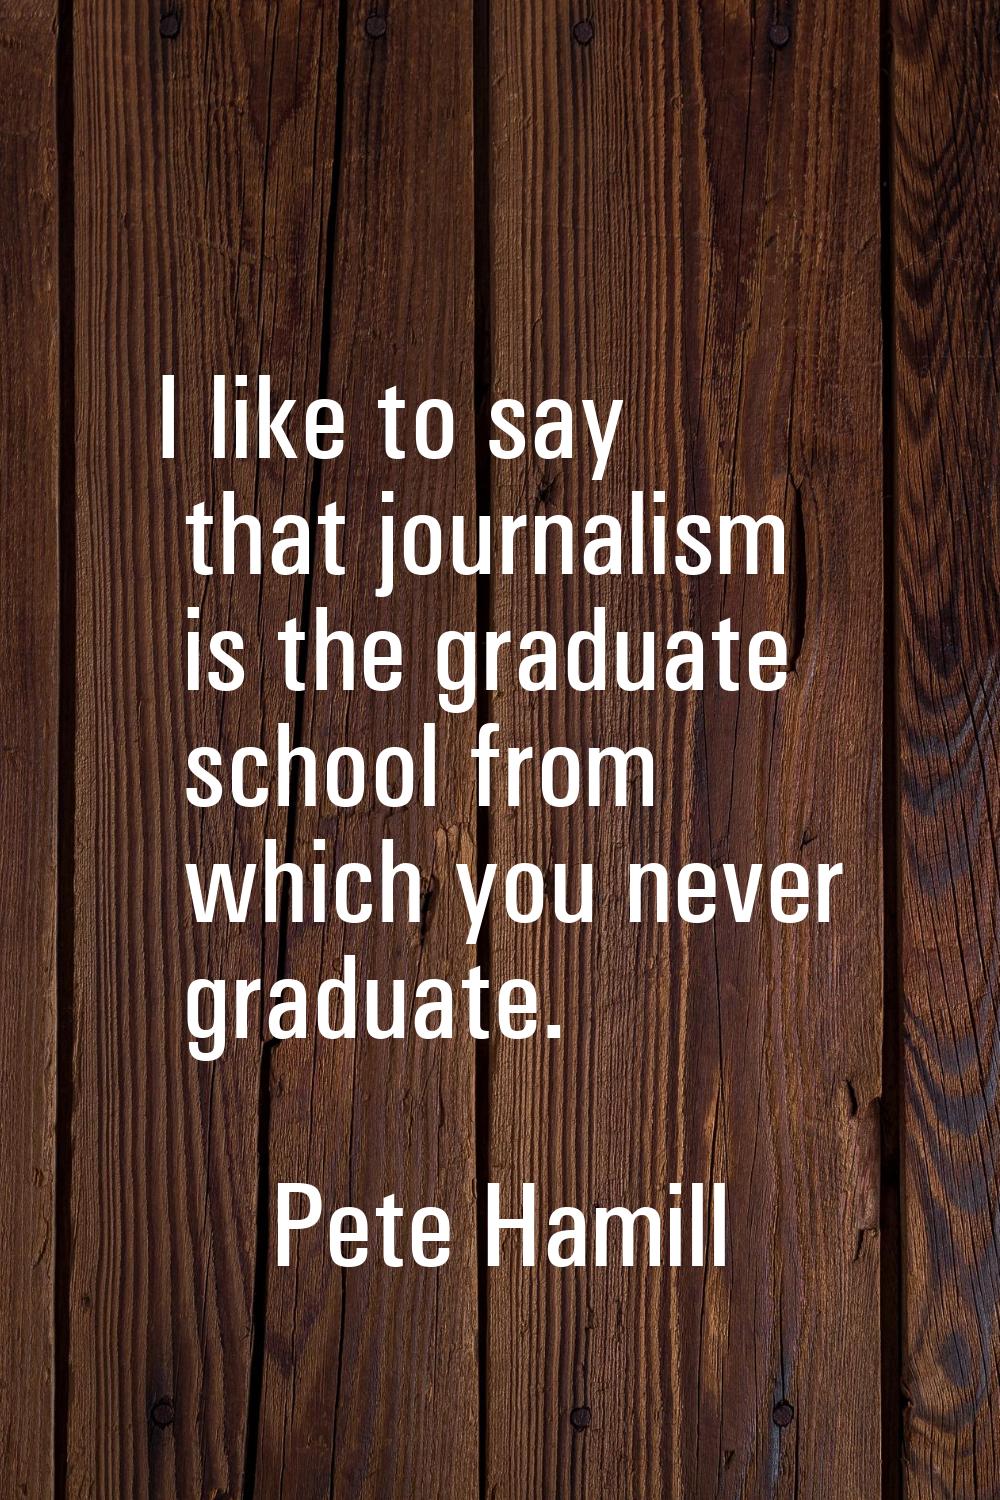 I like to say that journalism is the graduate school from which you never graduate.